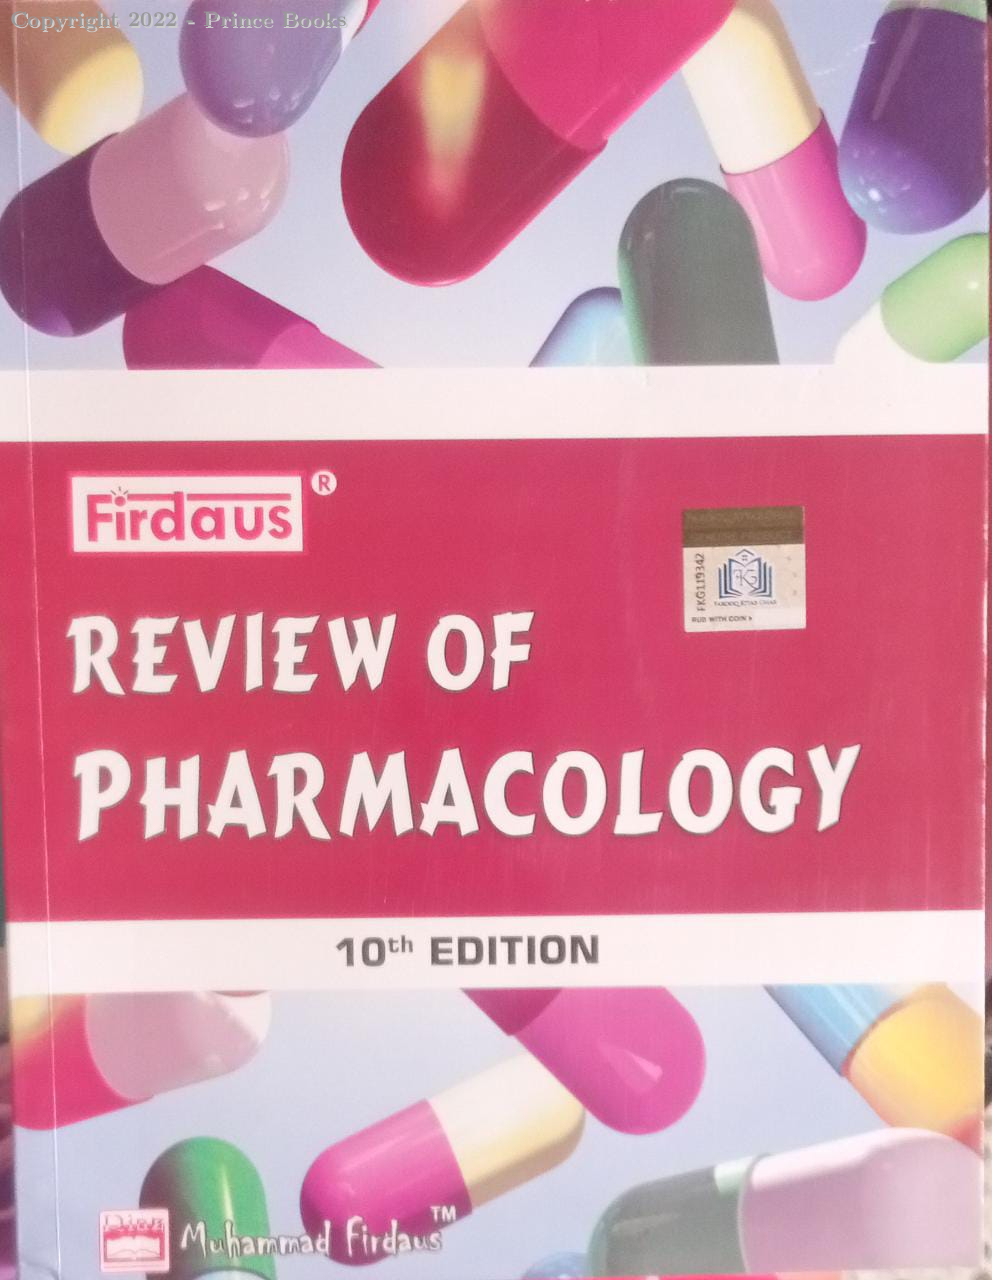 firdaus review of pharmacology, 10e